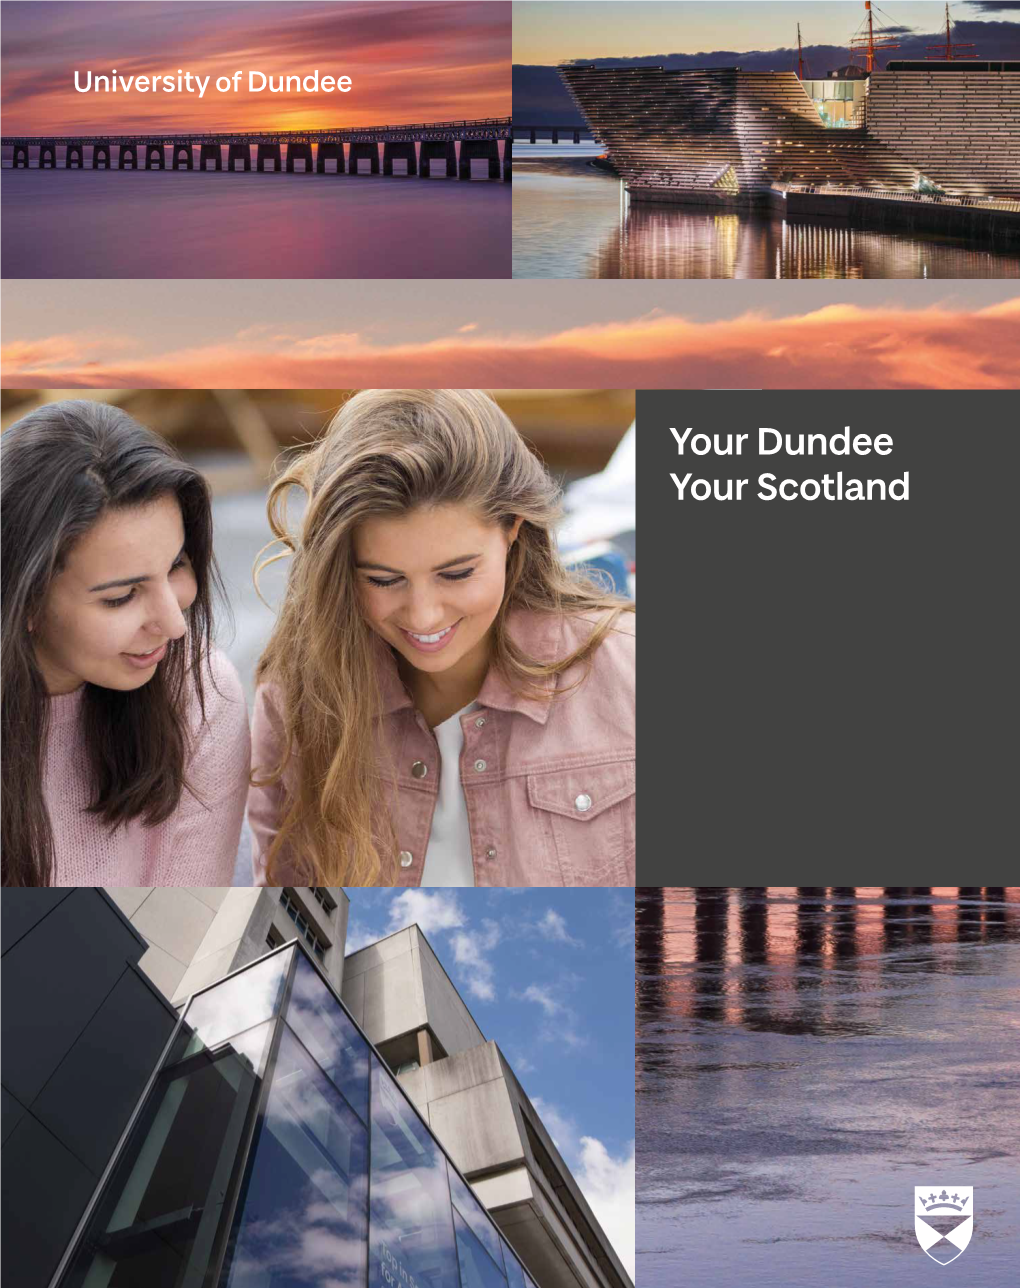 Your Dundee Your Scotland Discover Dundee Discover Scotland